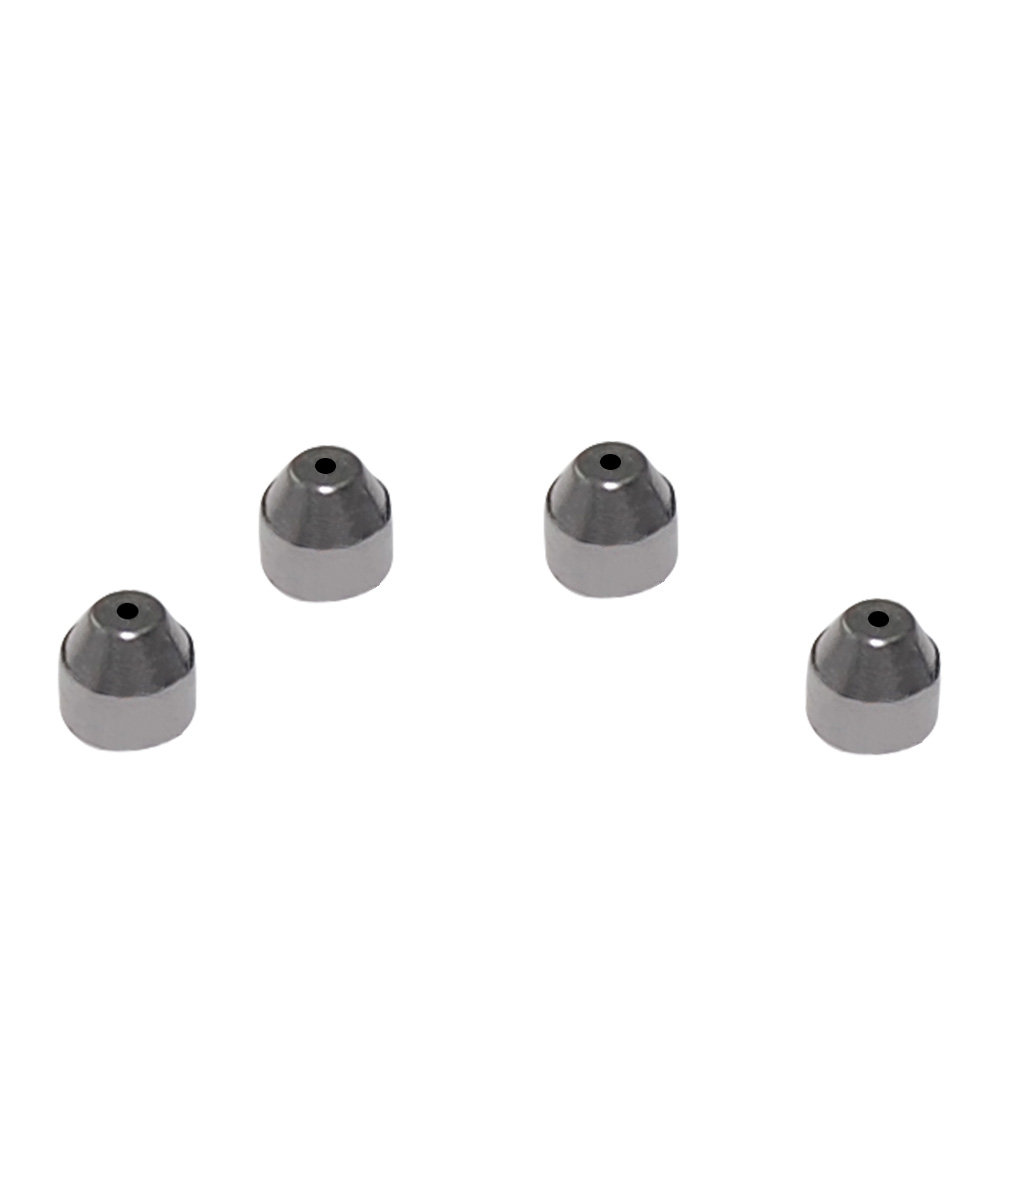 5080-8853  Ferrule, graphite, short, 0.5 mm id, for 0.1 to 0.32 mm columns, 10/pk